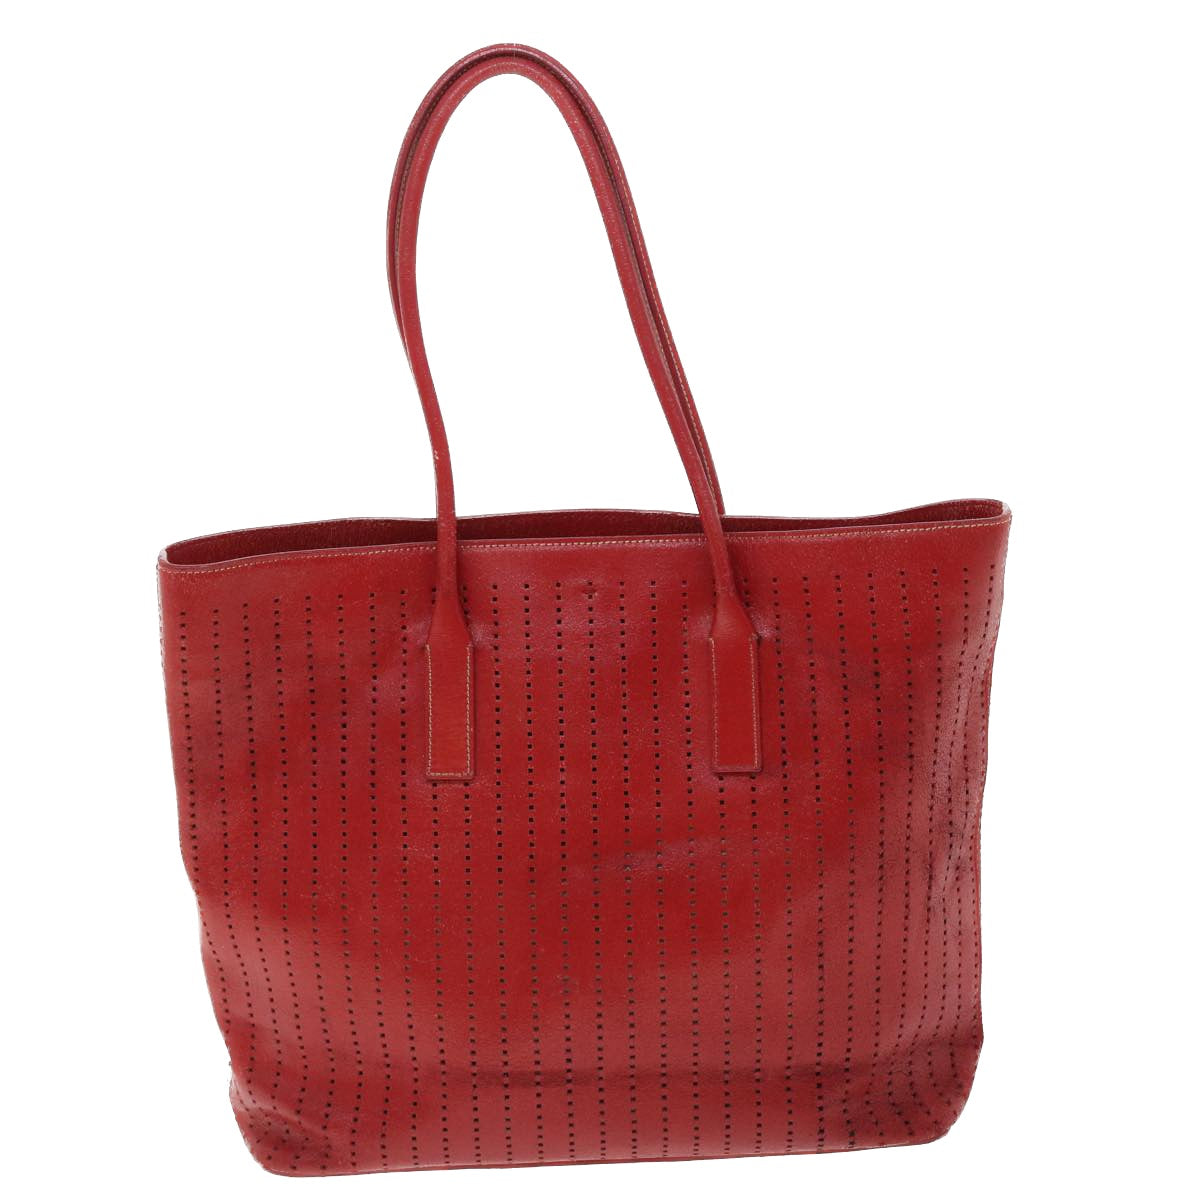 PRADA Tote Bag Leather Red Auth bs7661